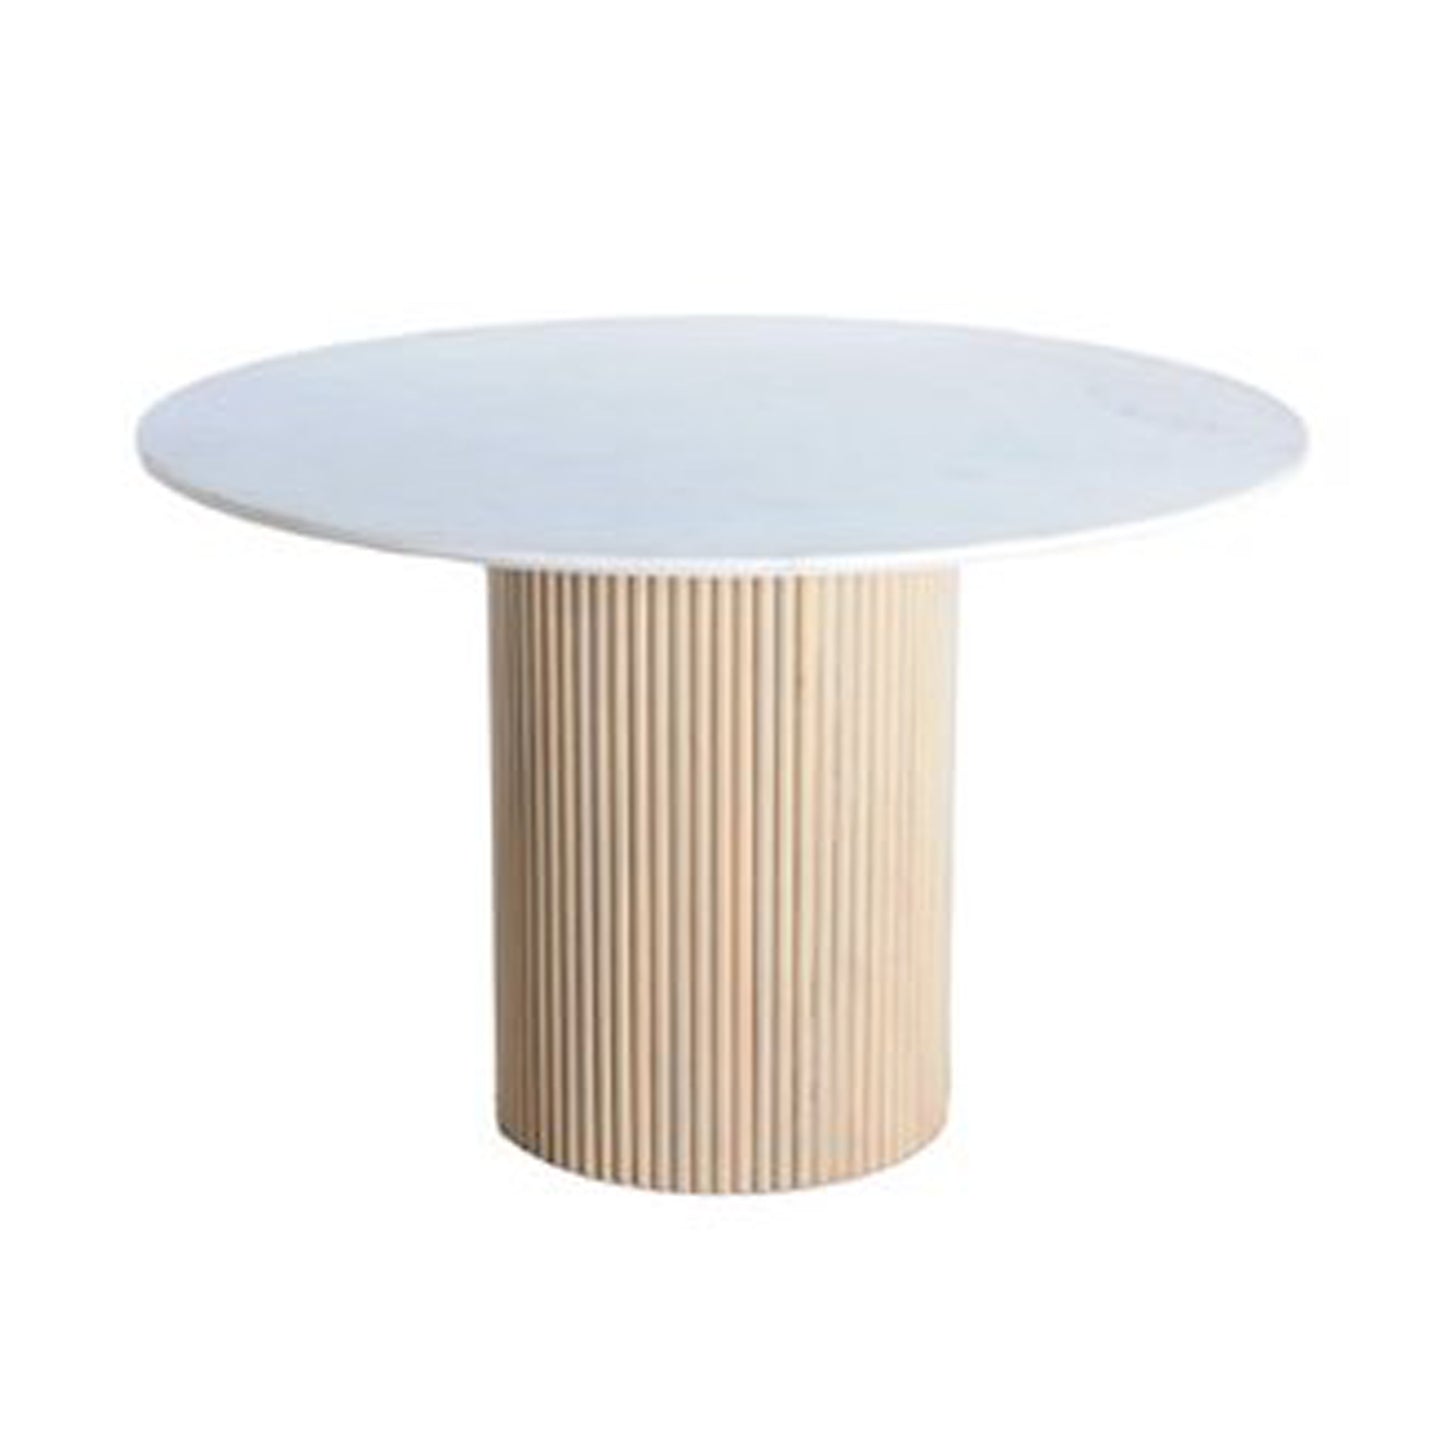 St Agnes Dining Table - 120cm Round